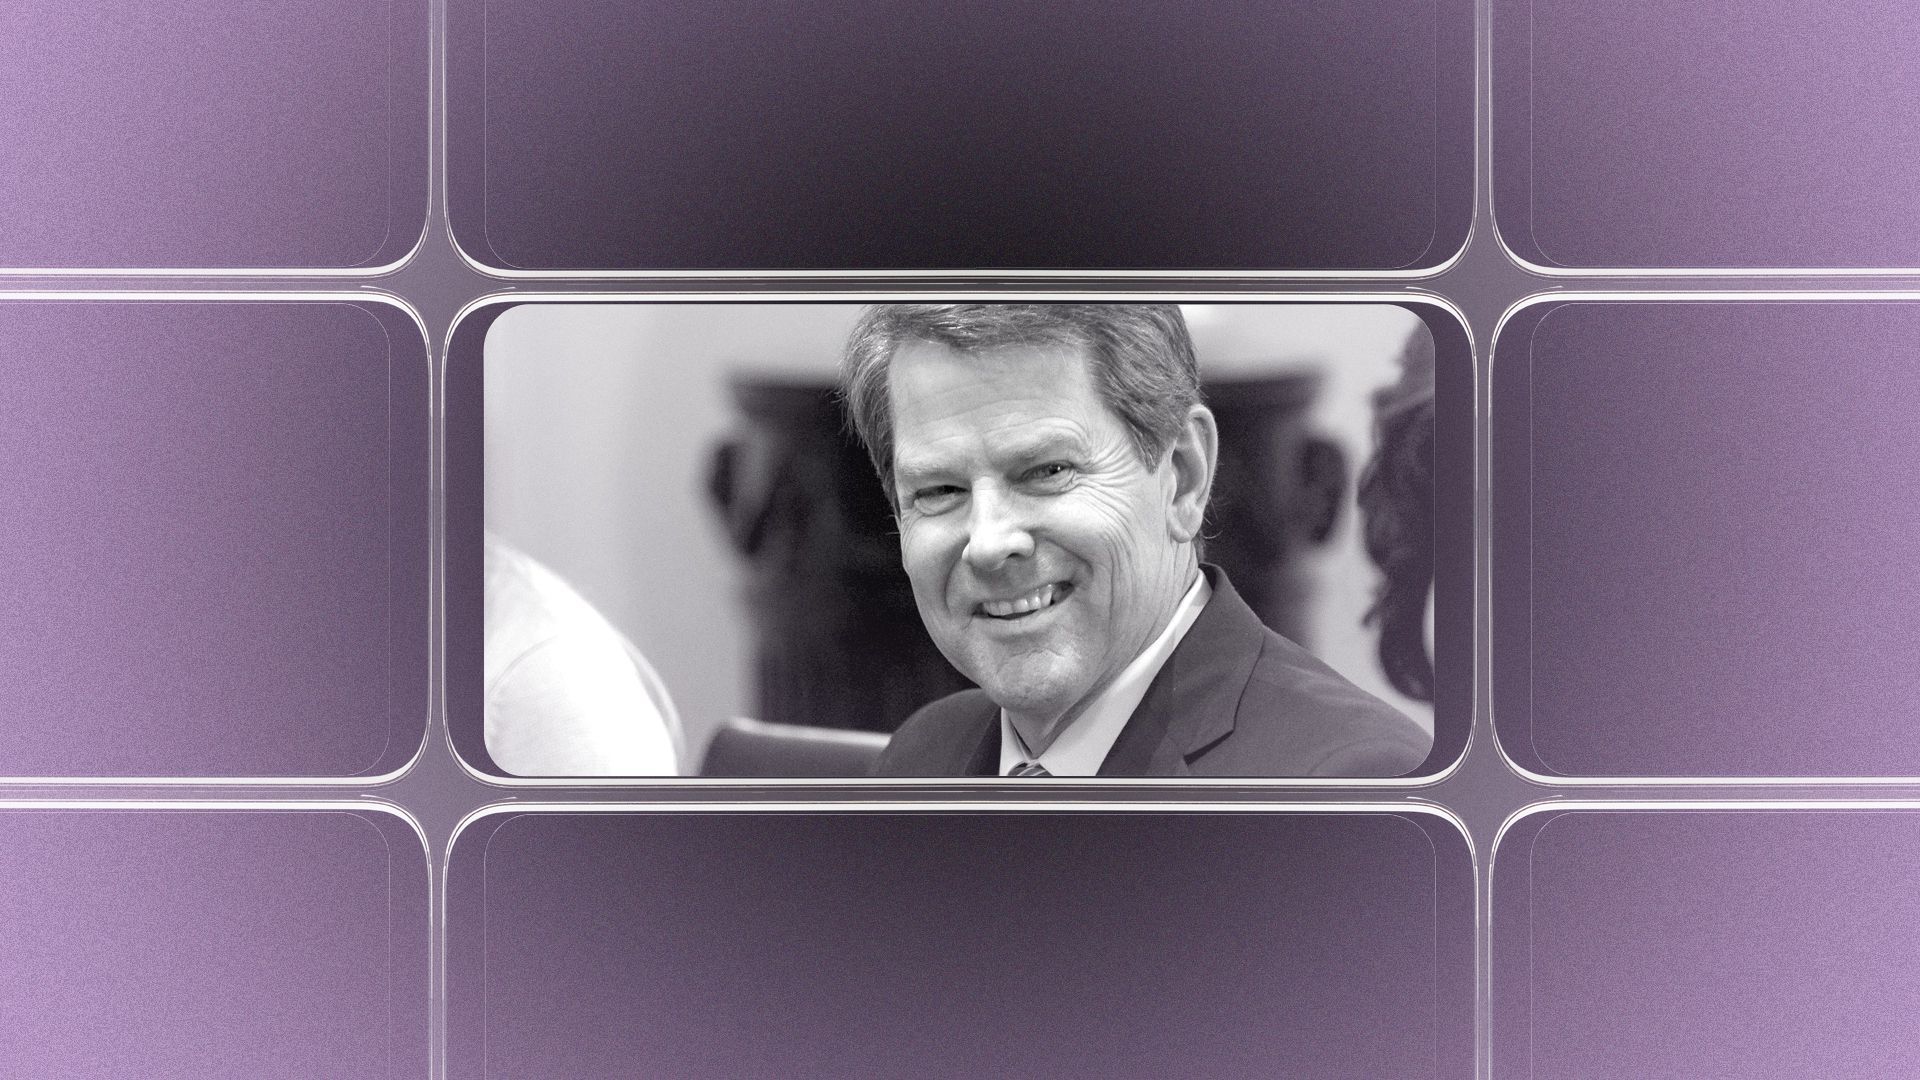 Photo illustration of a grid of smartphone screens, the center one showing an image of Brian Kemp.